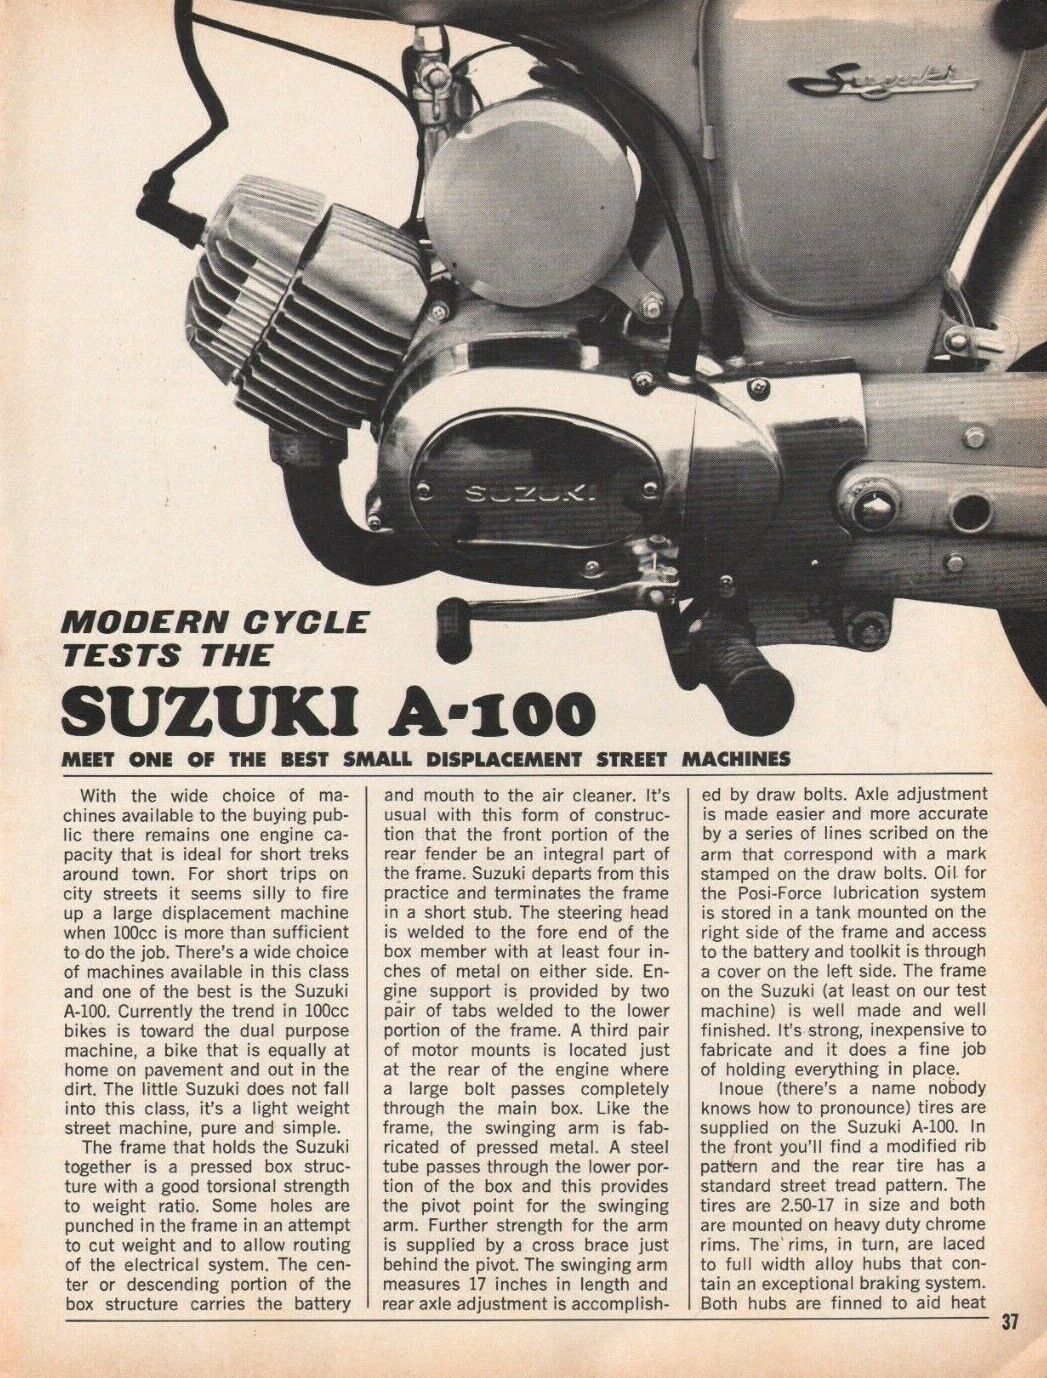 1968 Suzuki A-100 Charger - 3-Page Vintage Motorcycle Road Test Article